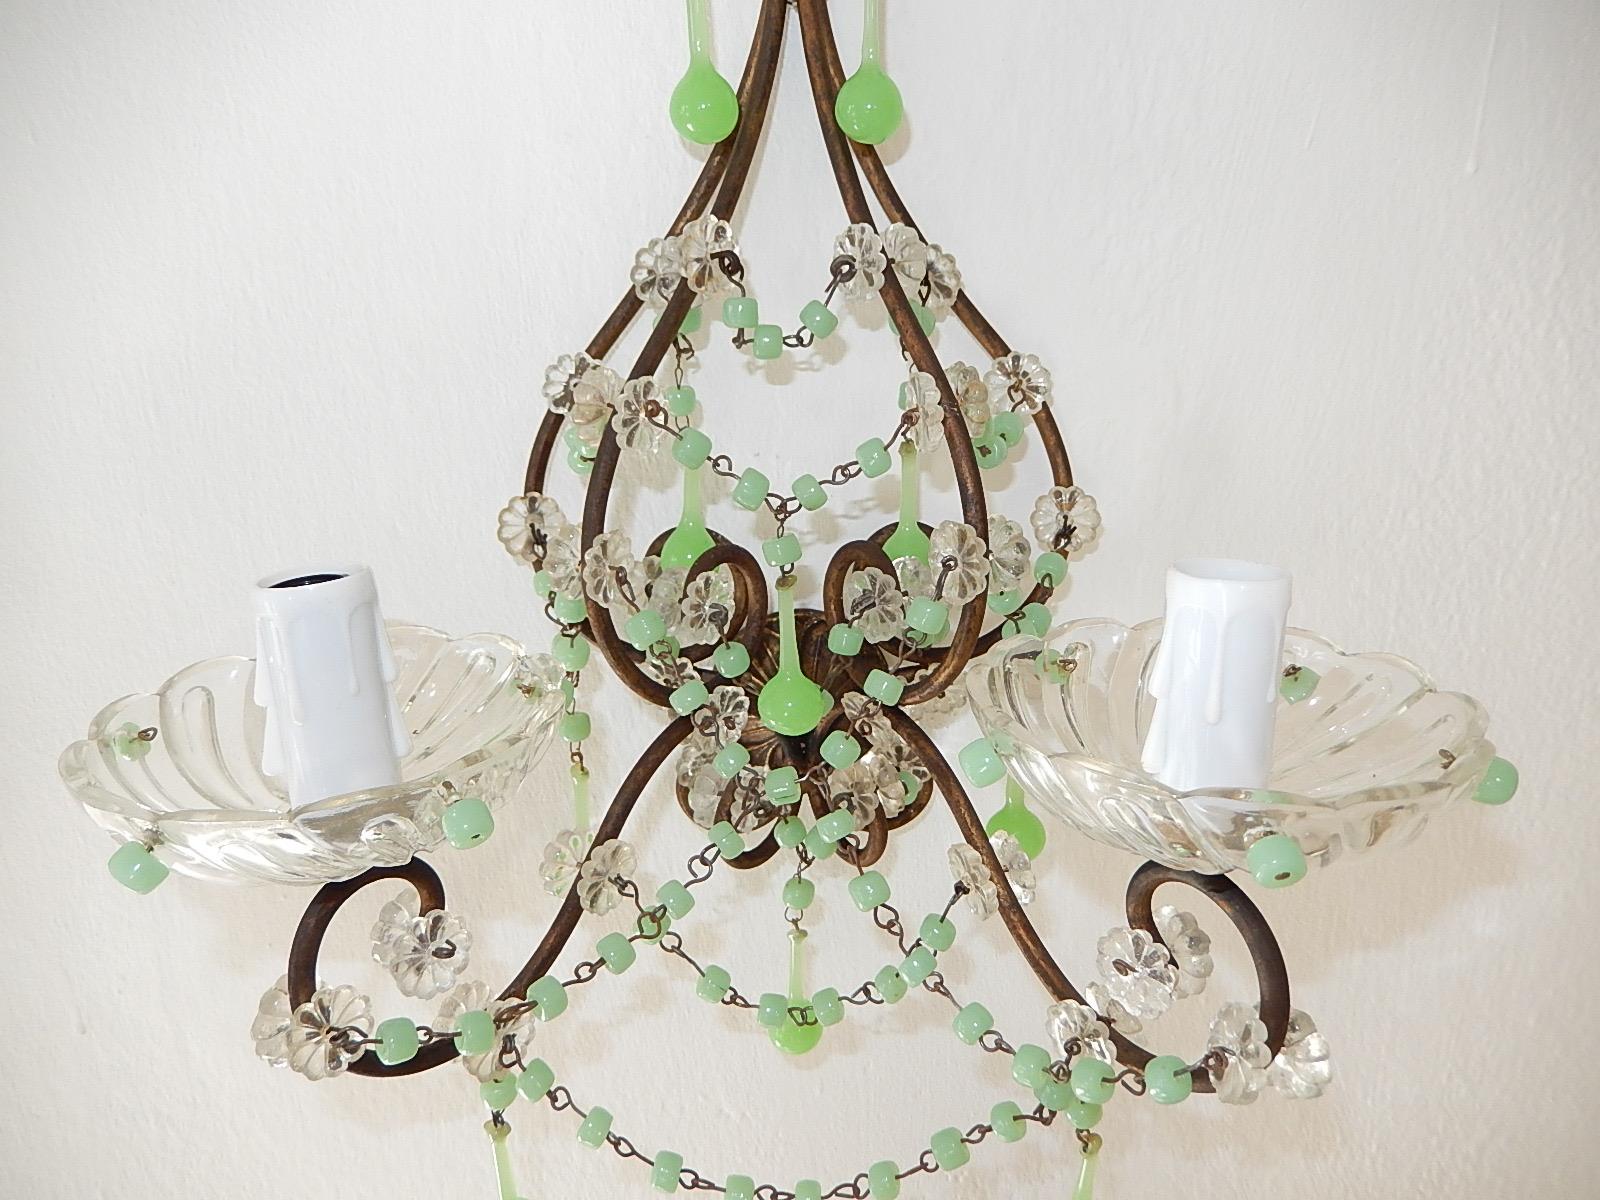 French Rare One of a Kind Green Opaline Sconces, circa 1920 For Sale 5